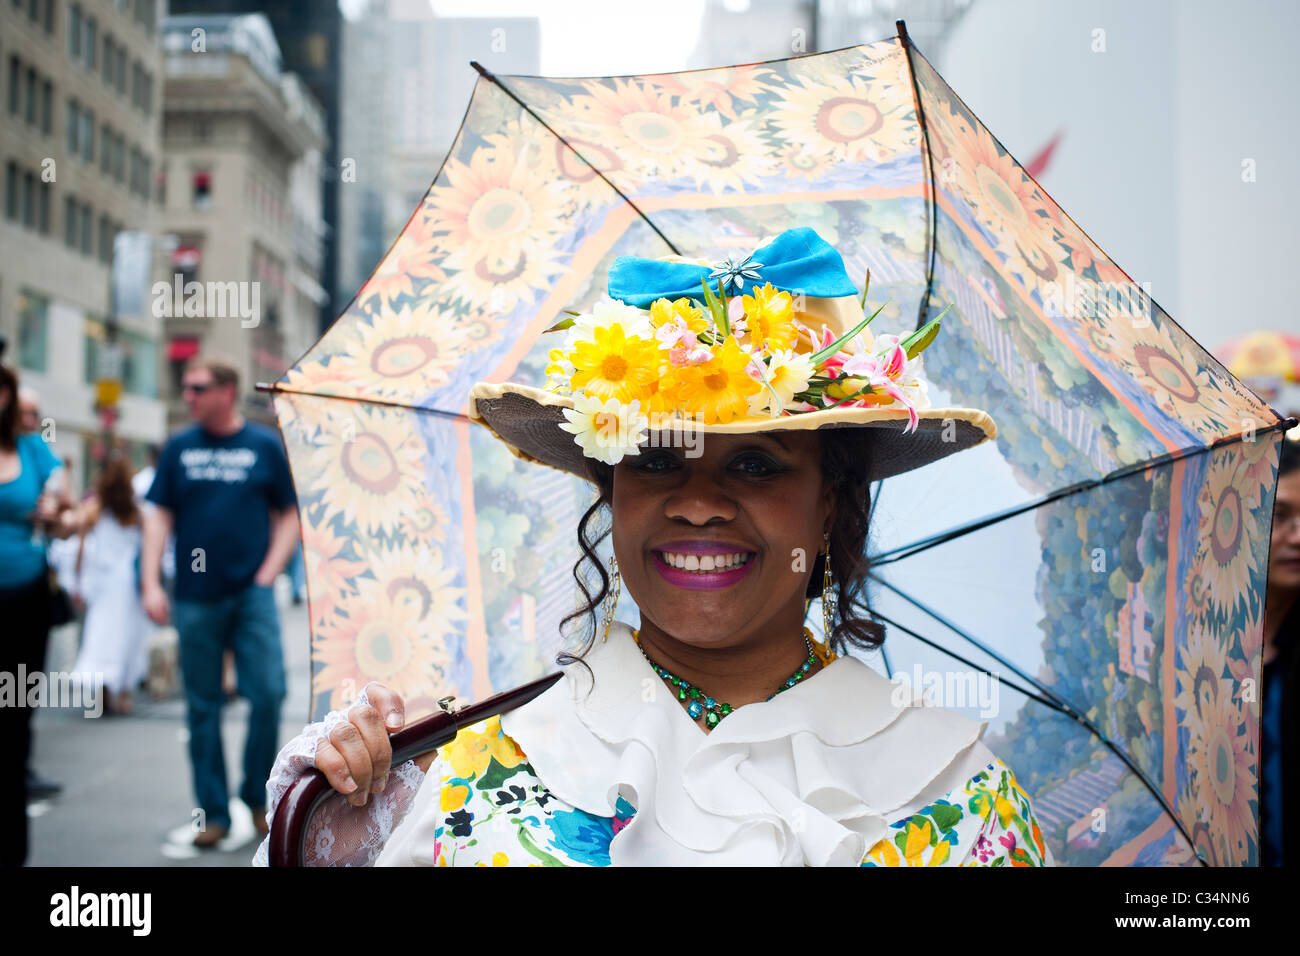 Thousands turn out on a warm and sunny Easter Sunday in New York Stock Photo